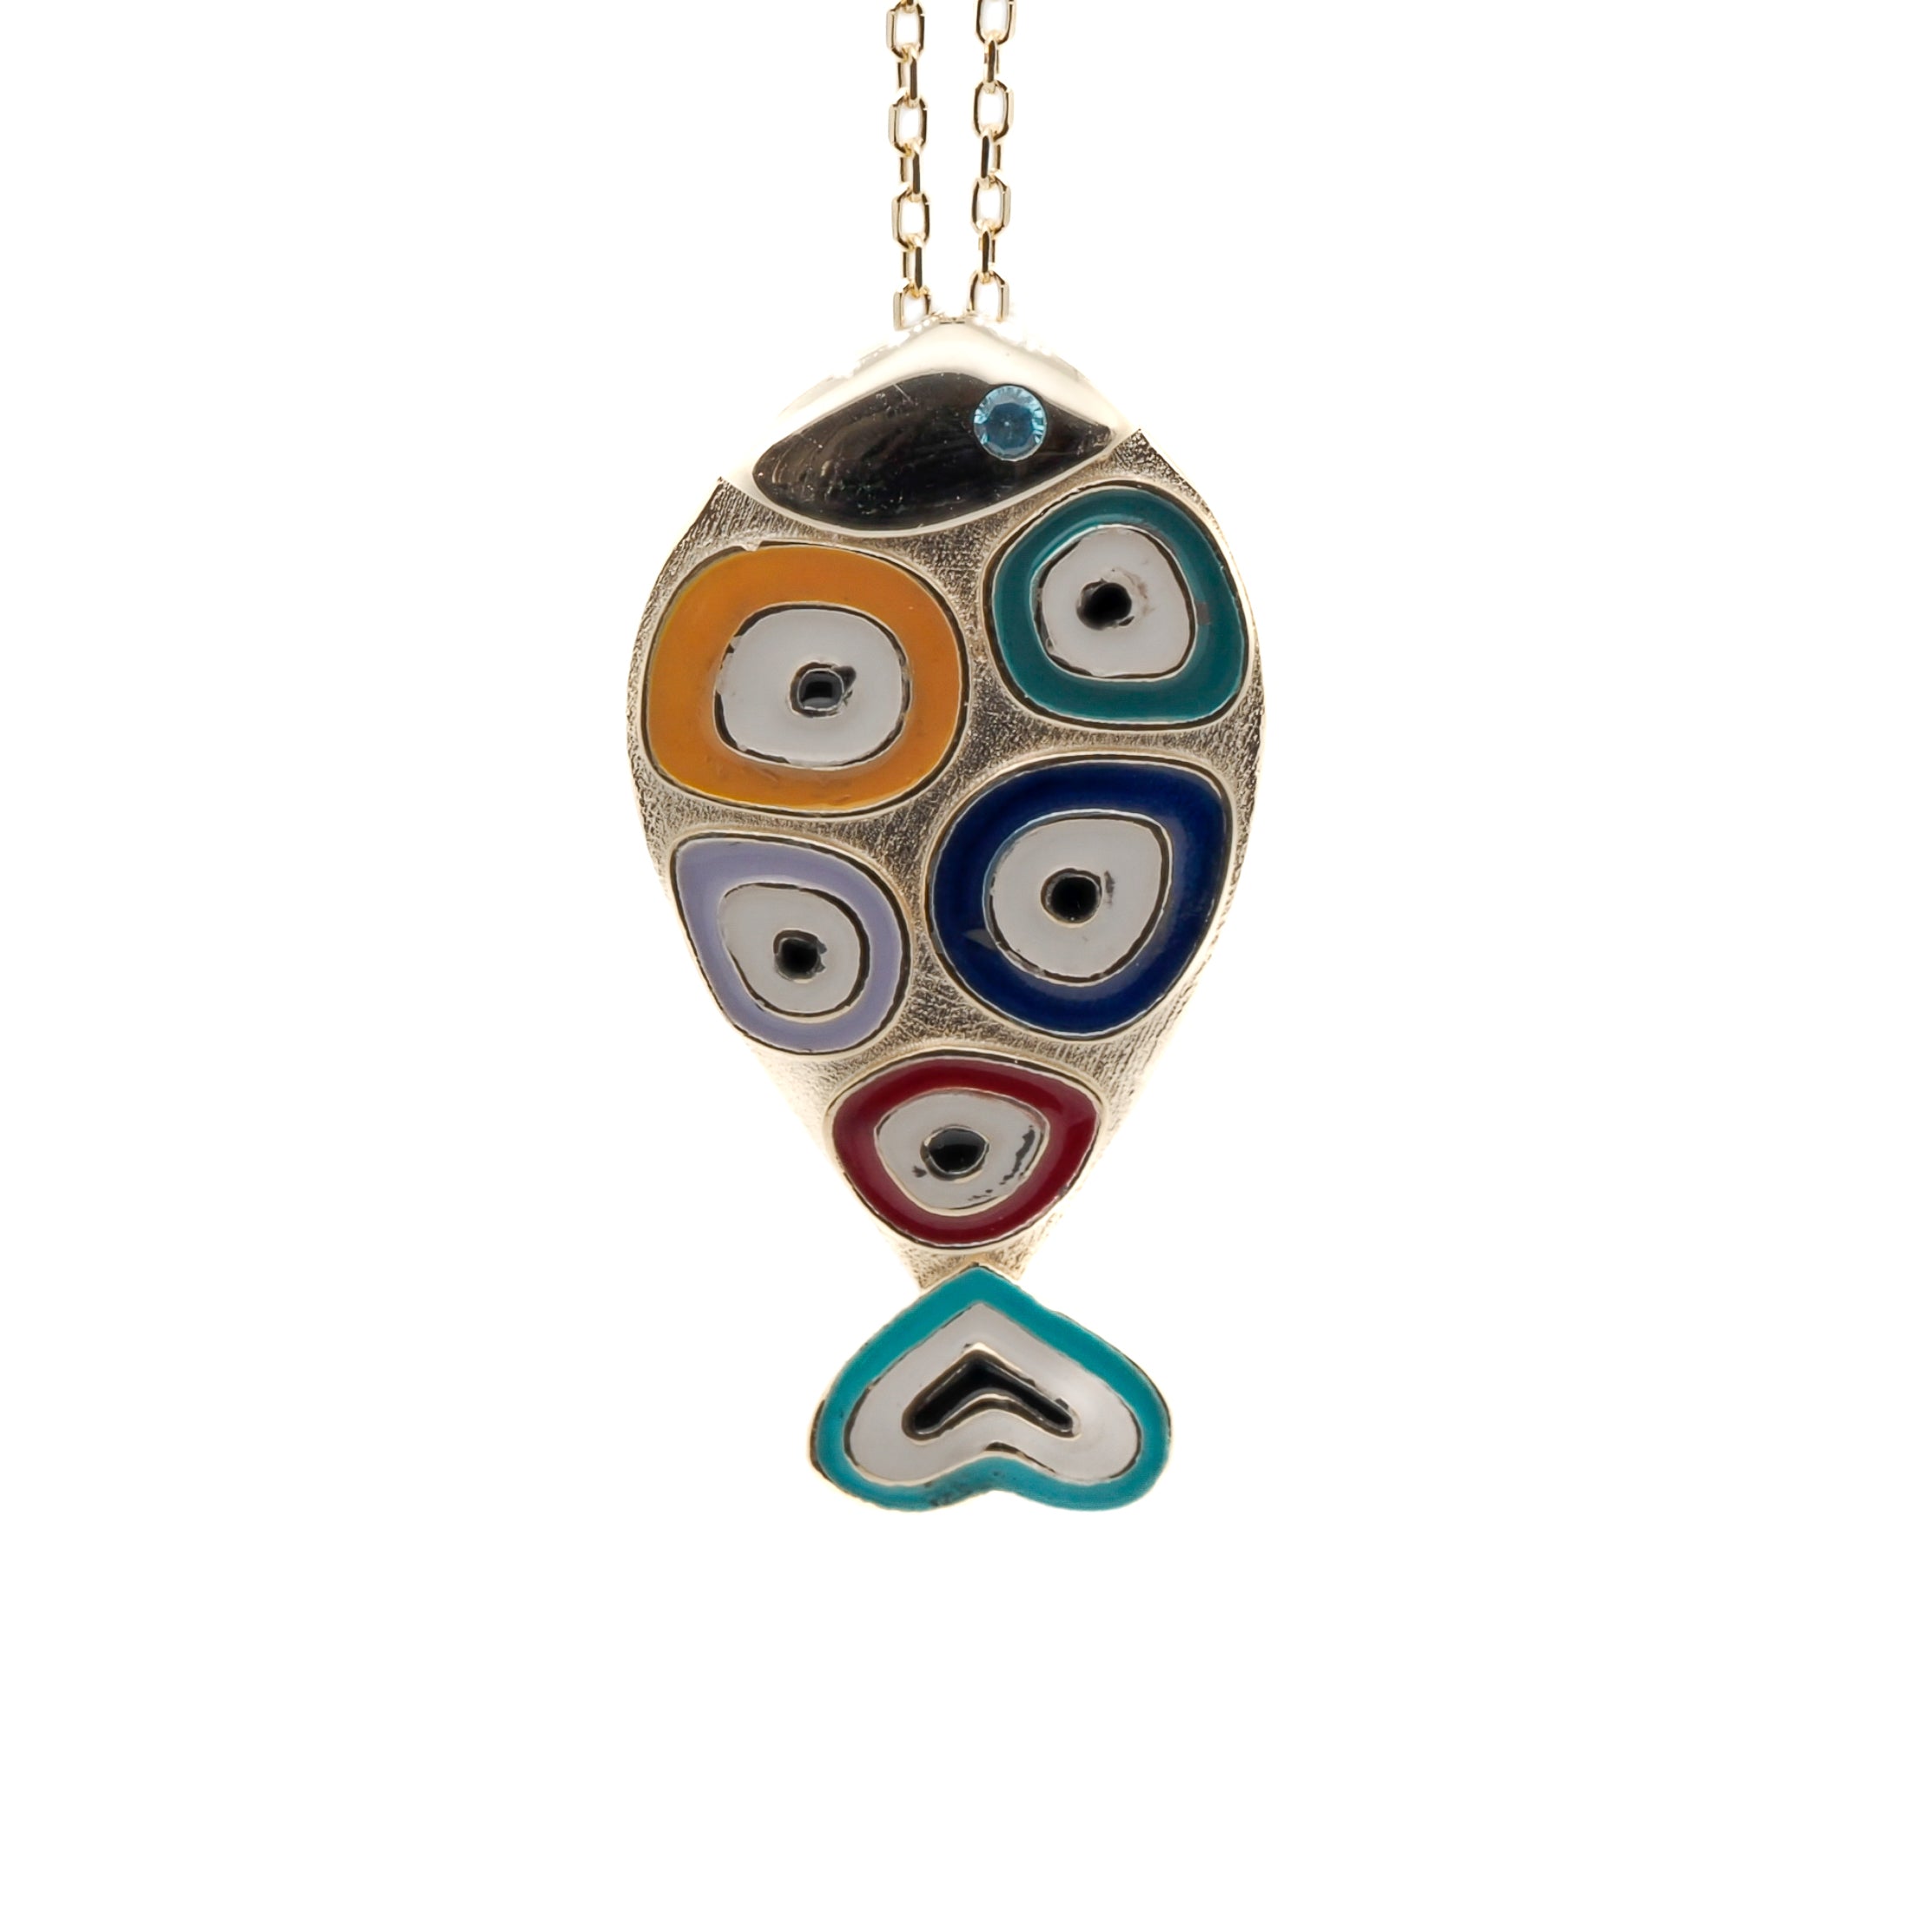 Gold and Enamel Evil Eye Fish Necklace - Handmade 925 Sterling silver on 18K gold plated necklace with a colorful enamel pendant featuring a fish and intricate evil eye designs.